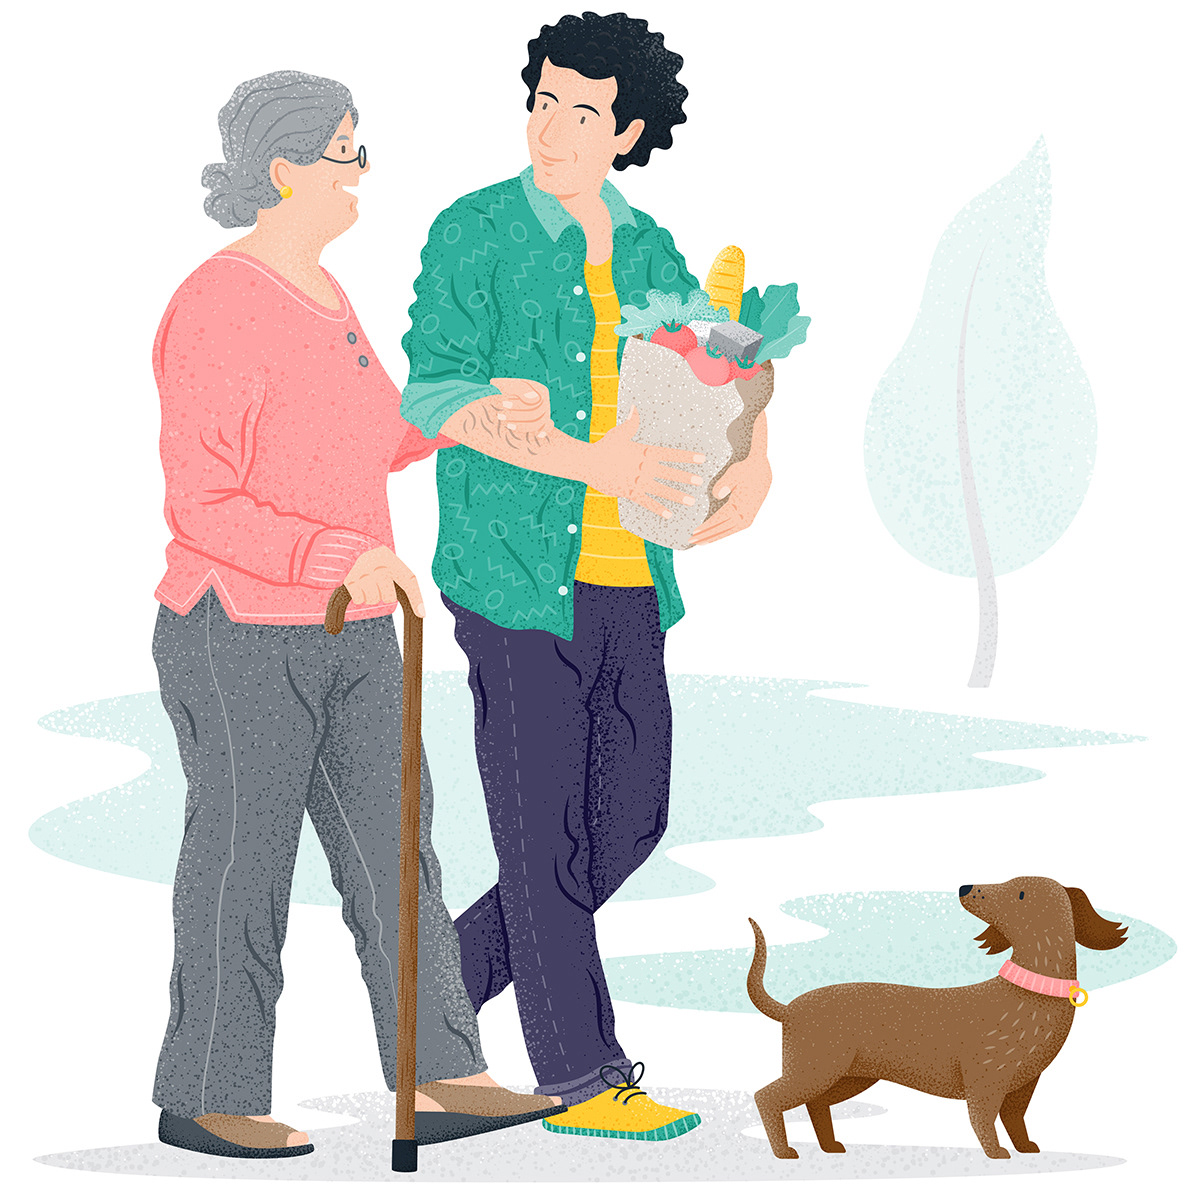 Illustration about a young man who helps a older woman to do the courses by Adrian Bauer